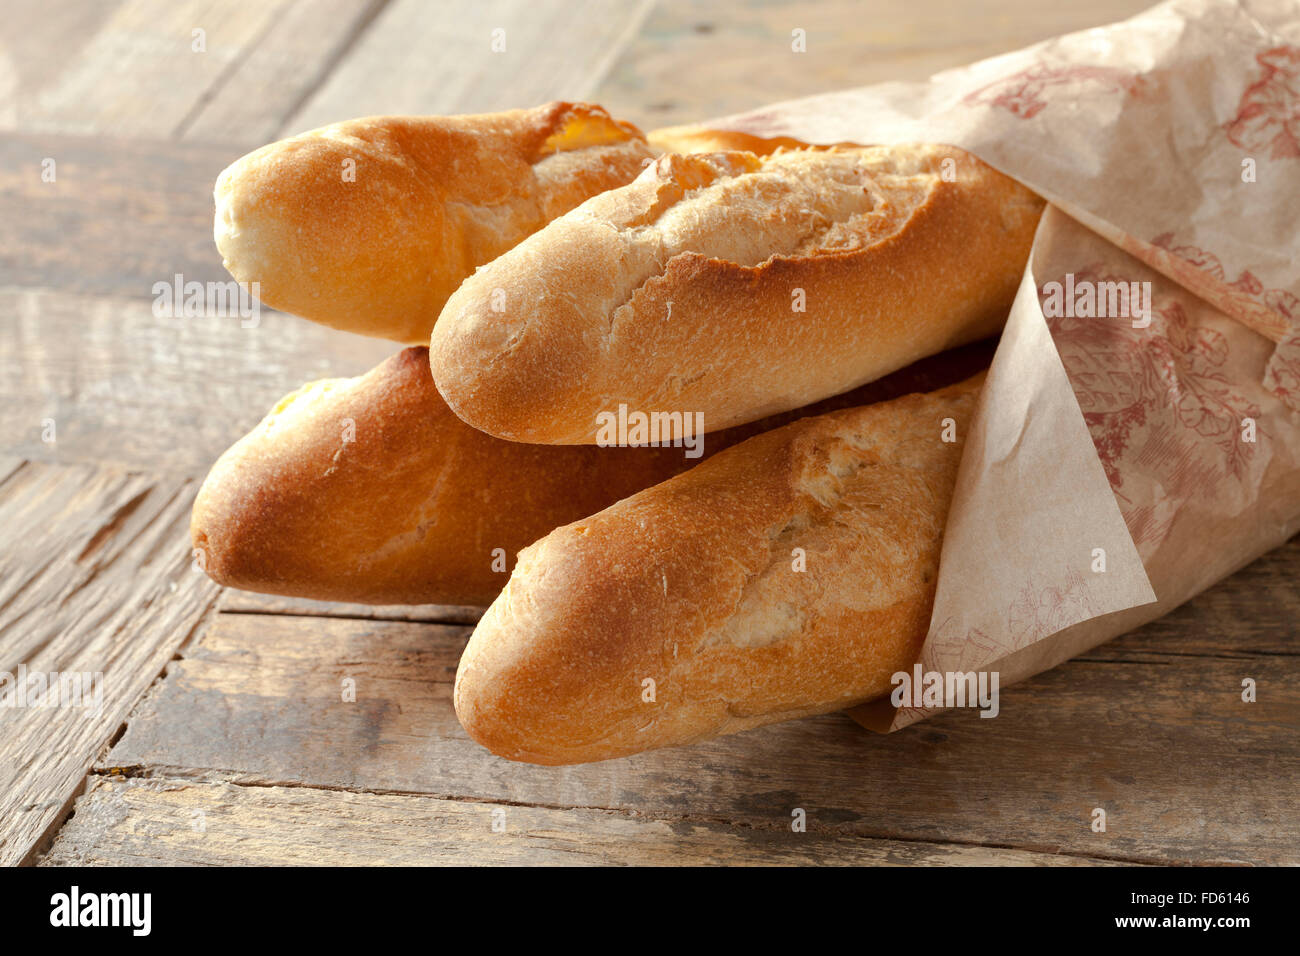 French baguettes wrapped in paper Stock Photo